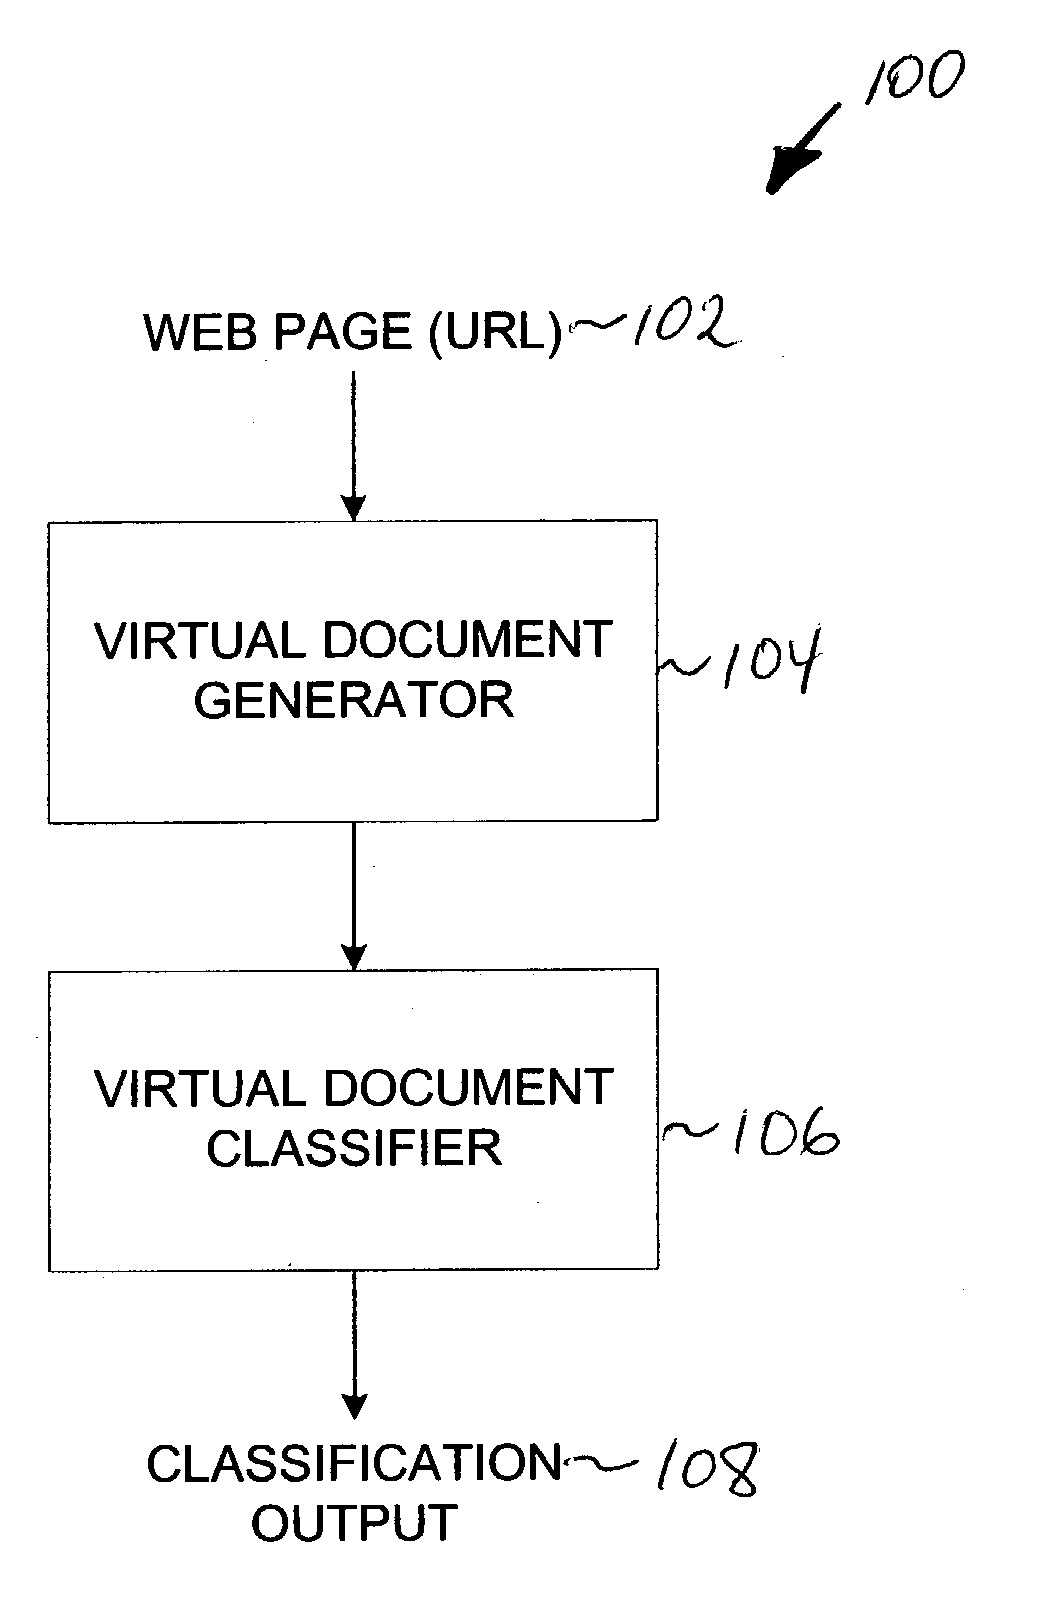 Using web structure for classifying and describing web pages